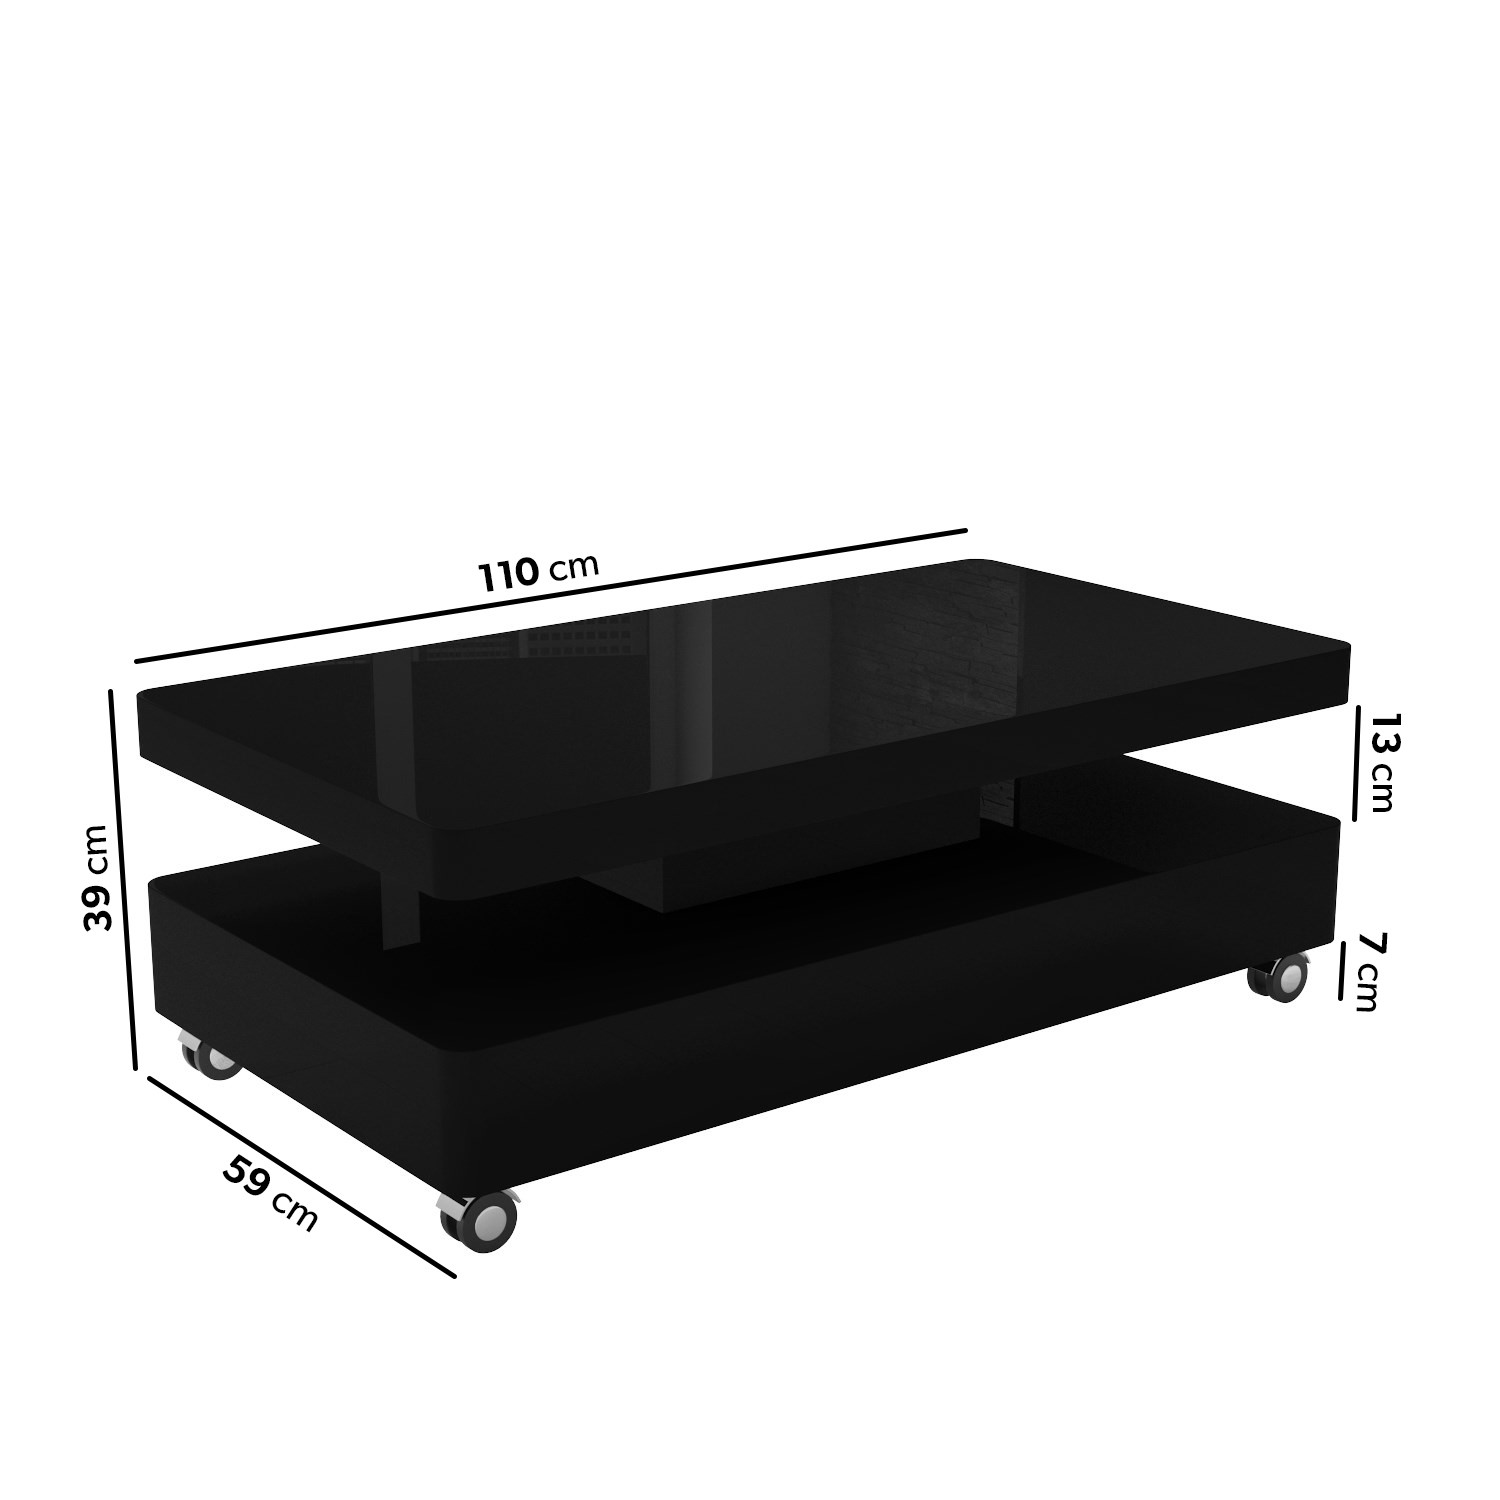 Read more about Large rectangular black gloss led coffee table tiffany